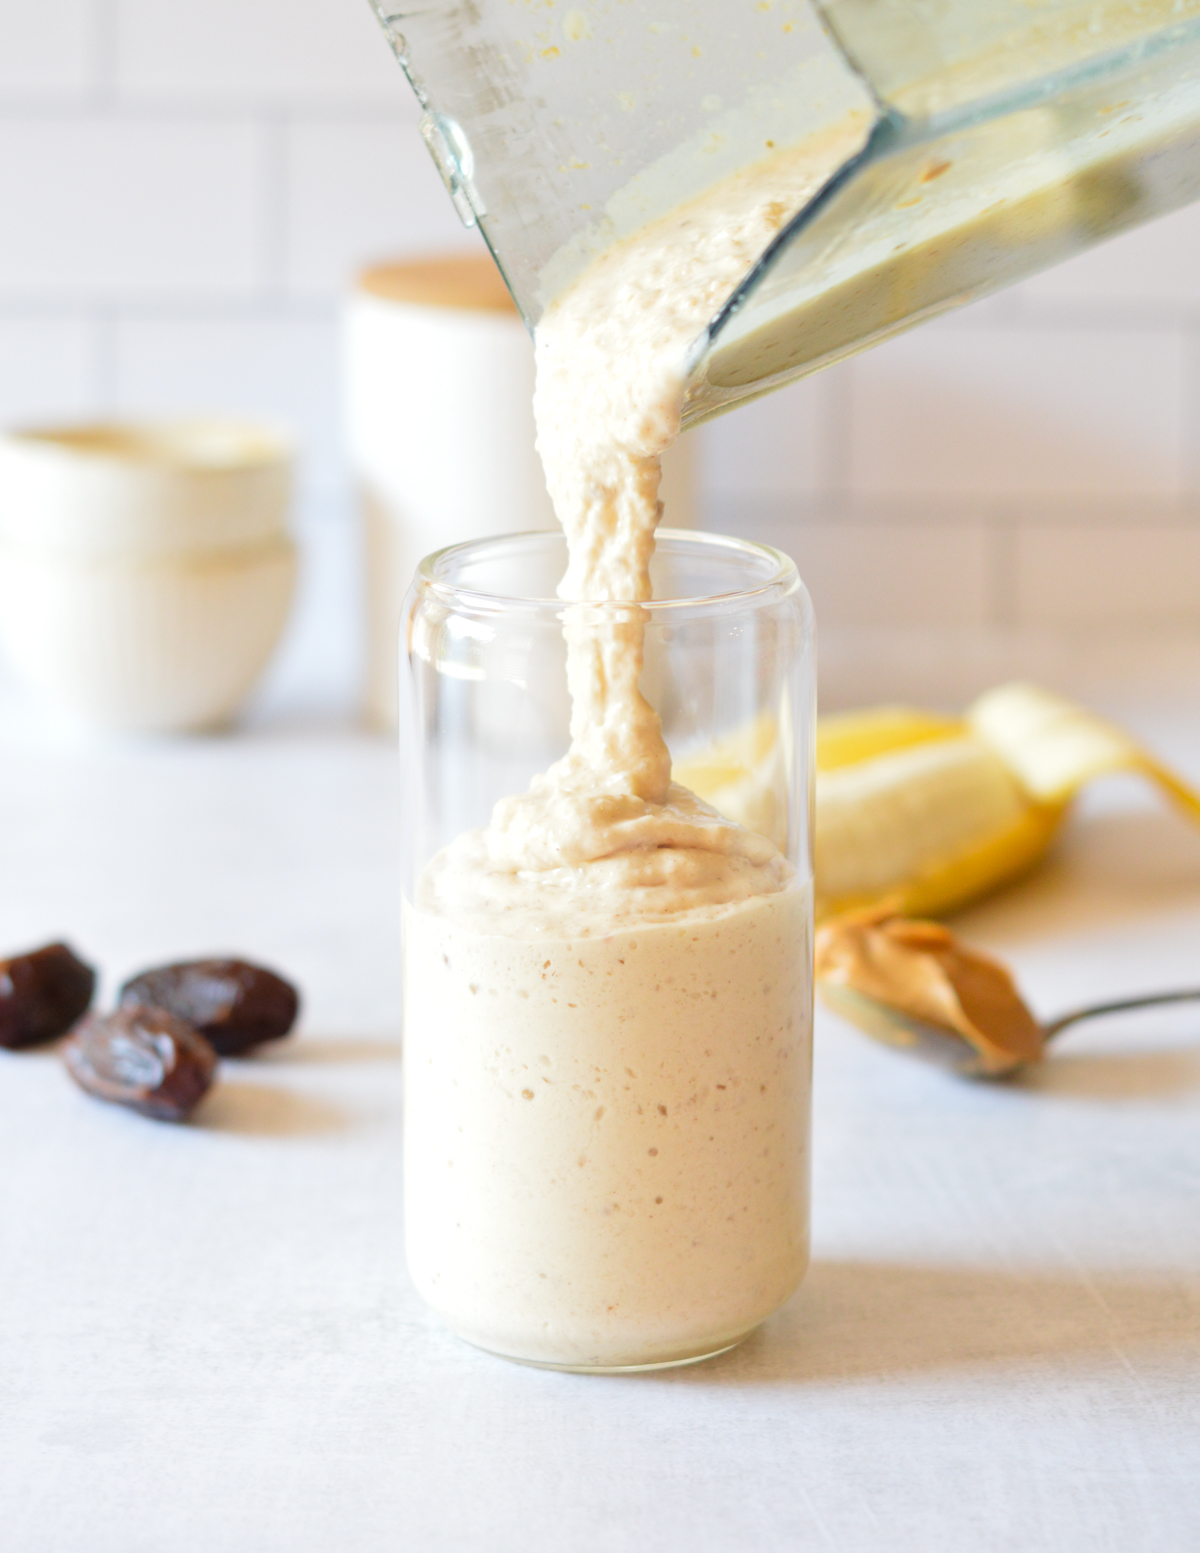 pouring a peanut butter smoothie into a glass next to dates, banana, and peanut butter.